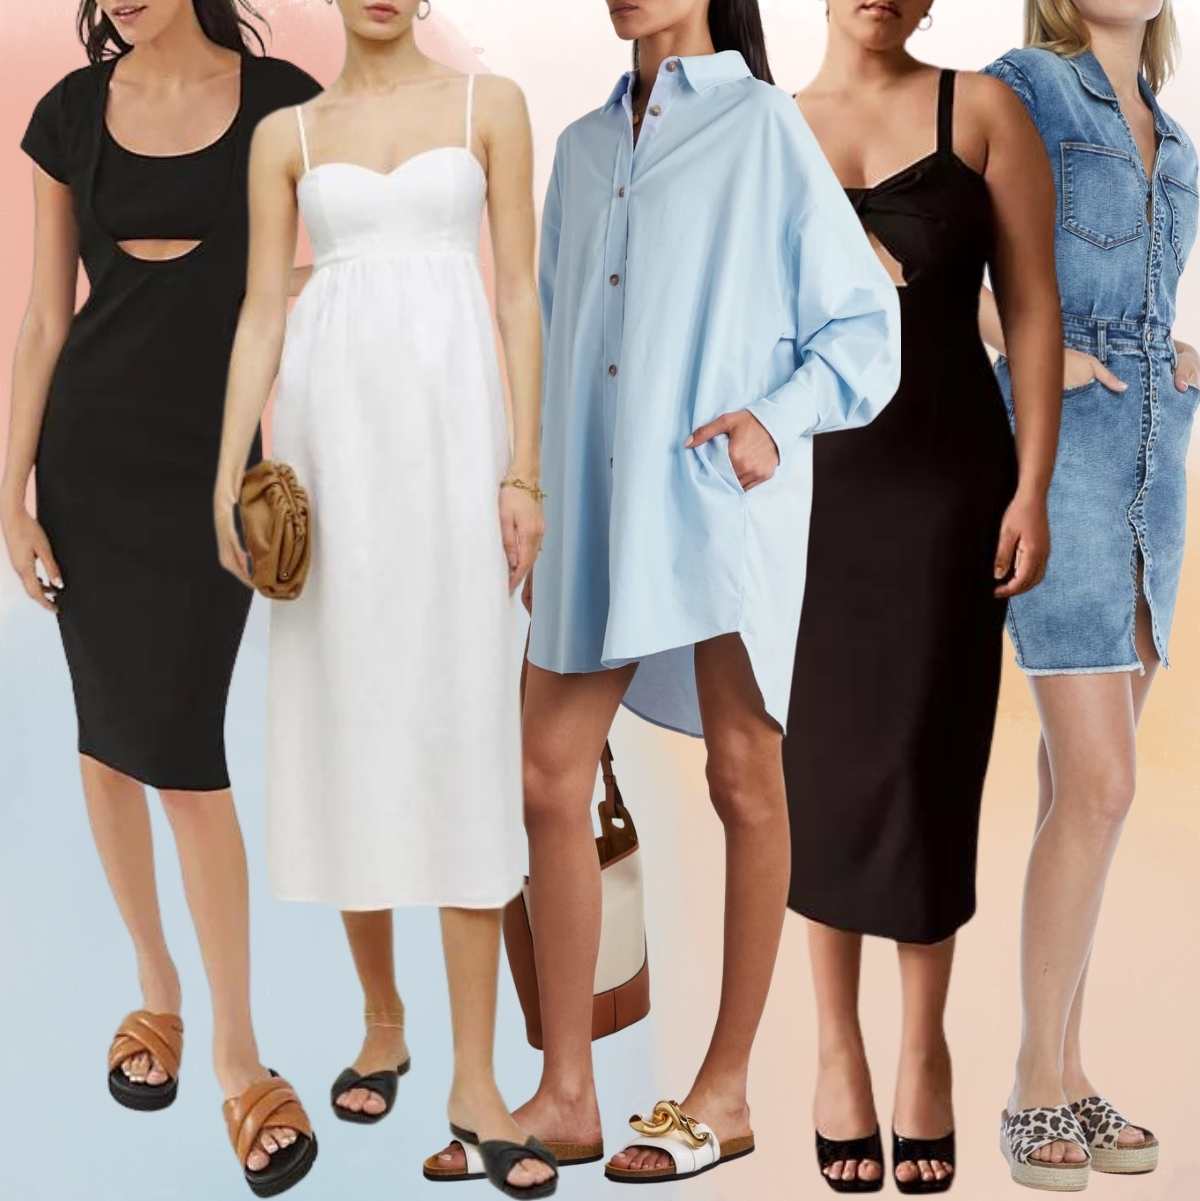 Collage of 5 women wearing different slides outfits with dresses.